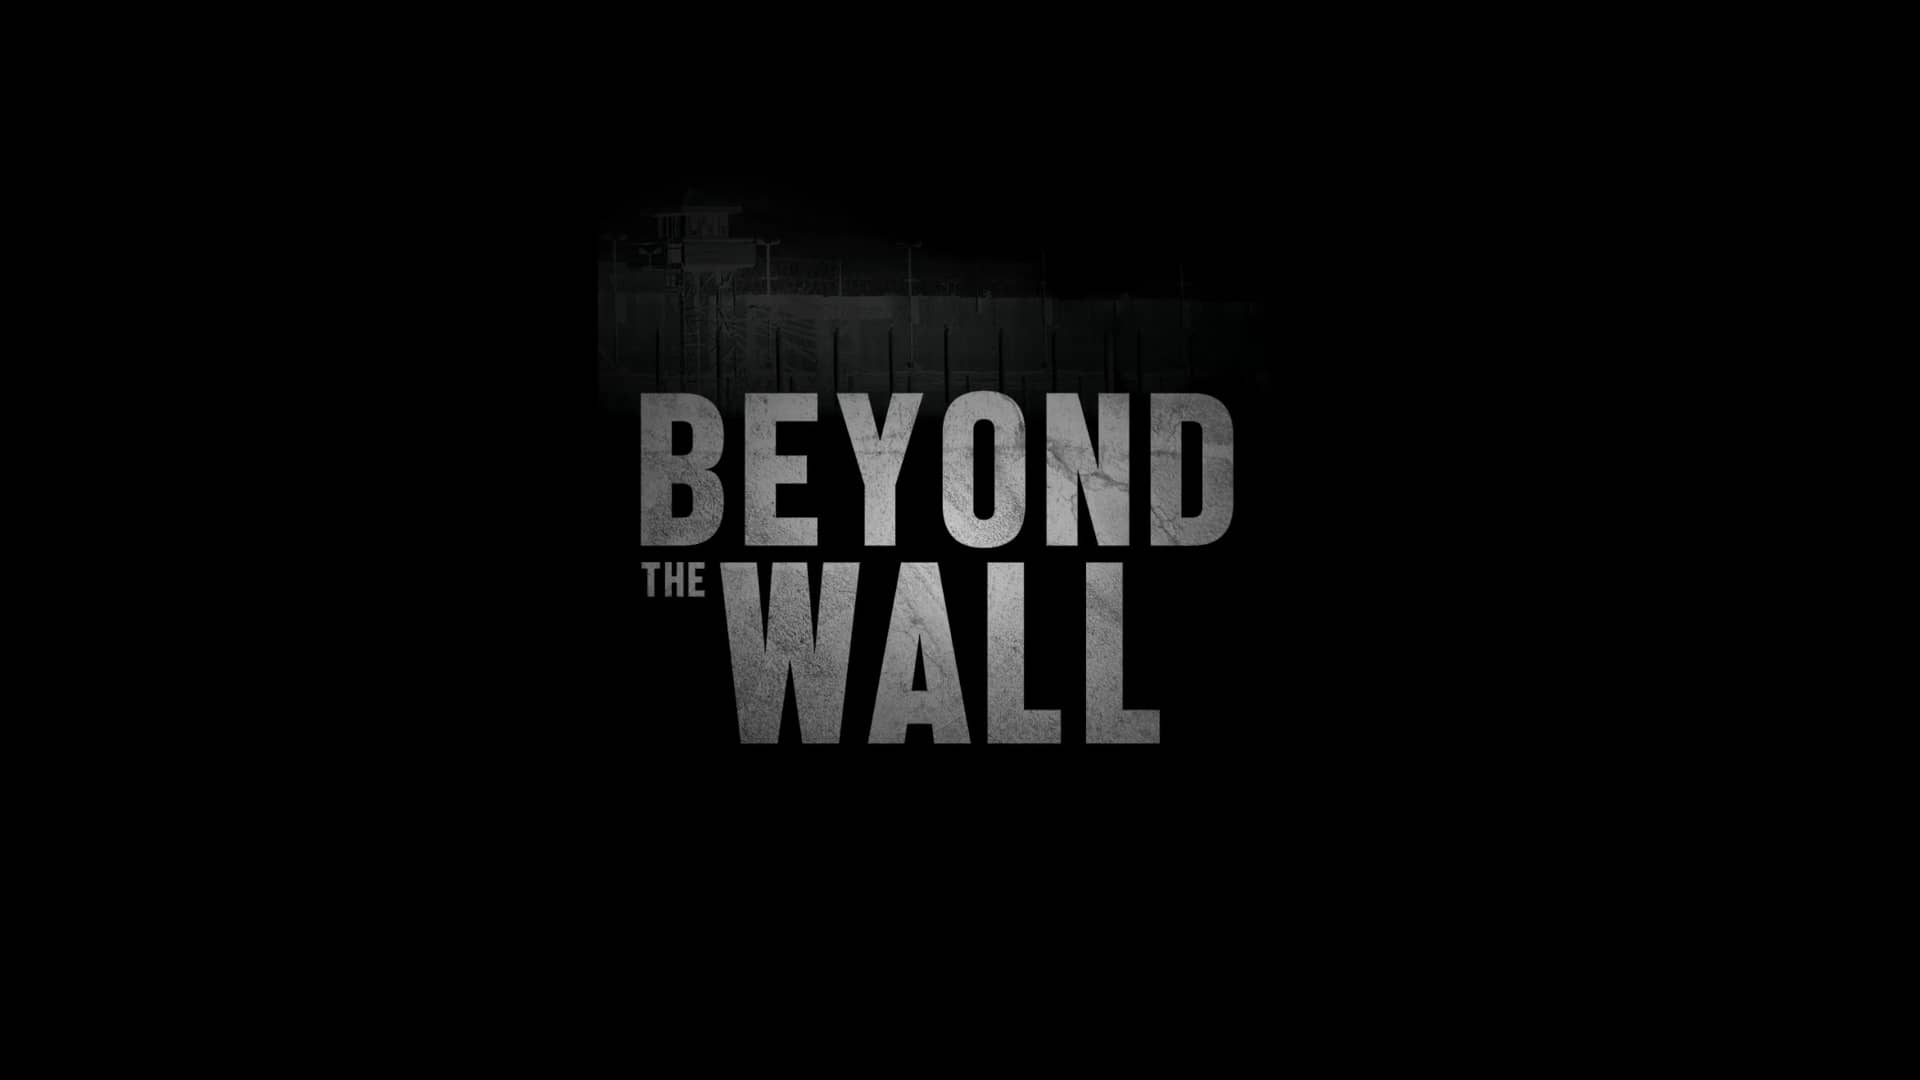 Beyond The Wall - Trailer on Vimeo